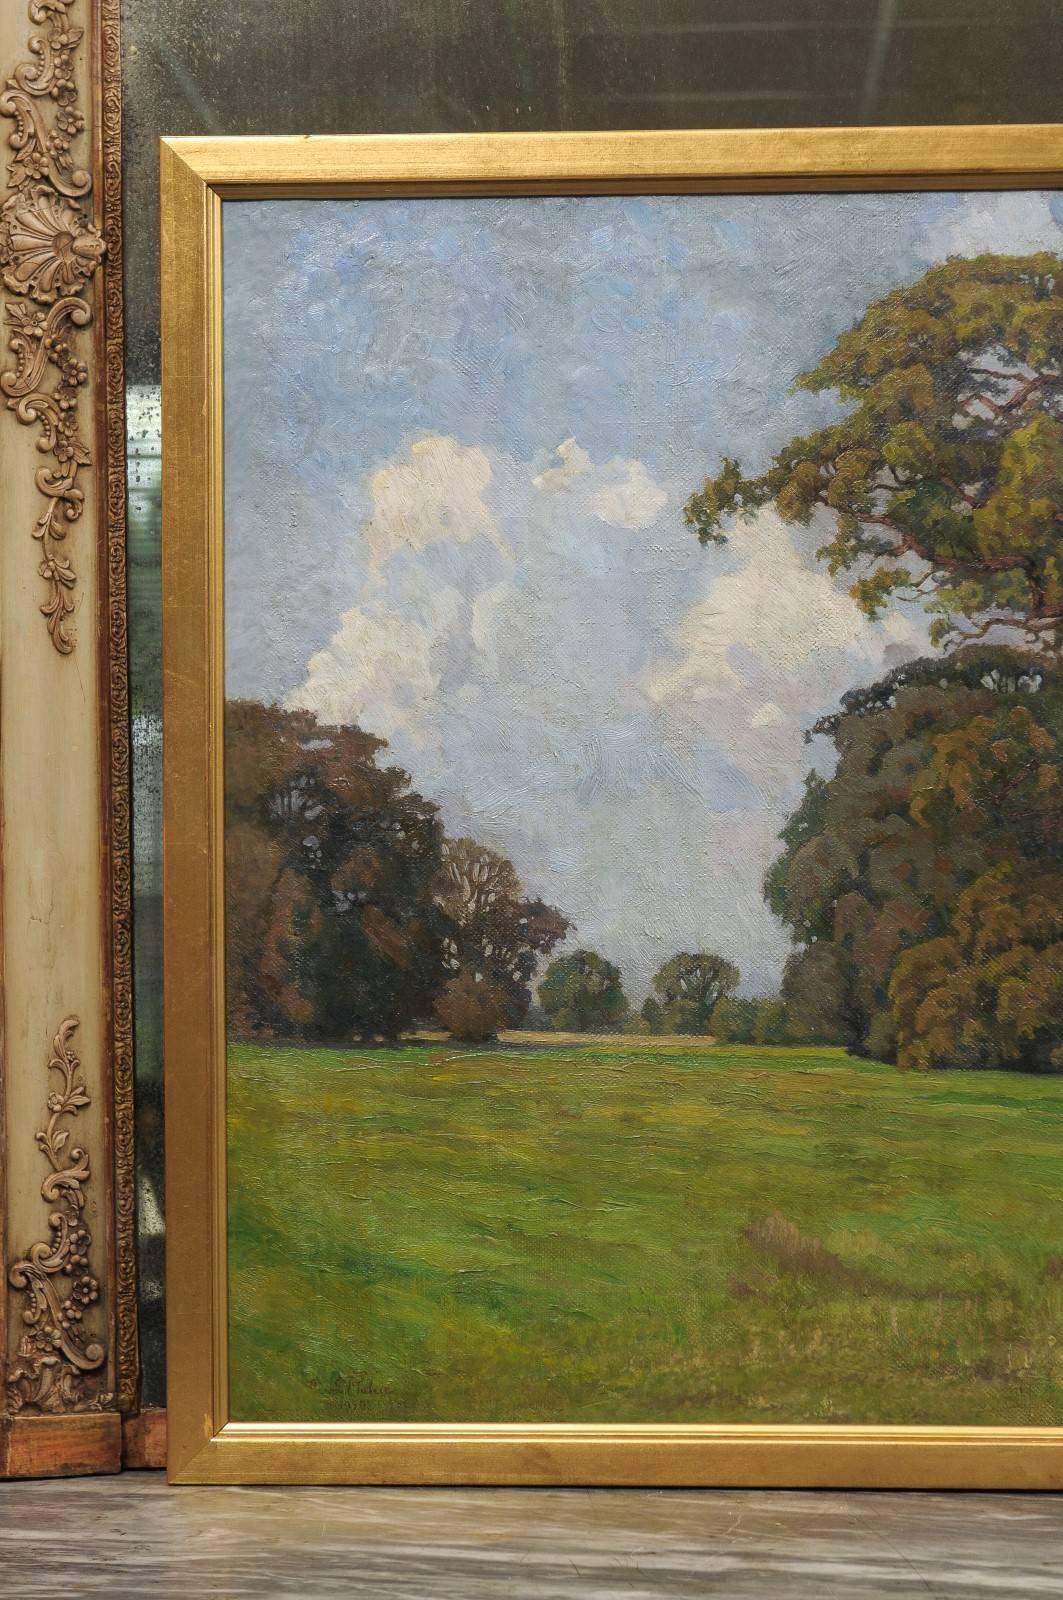 Gilt Framed Oil on Canvas Landscape Painting Signed and Dated 